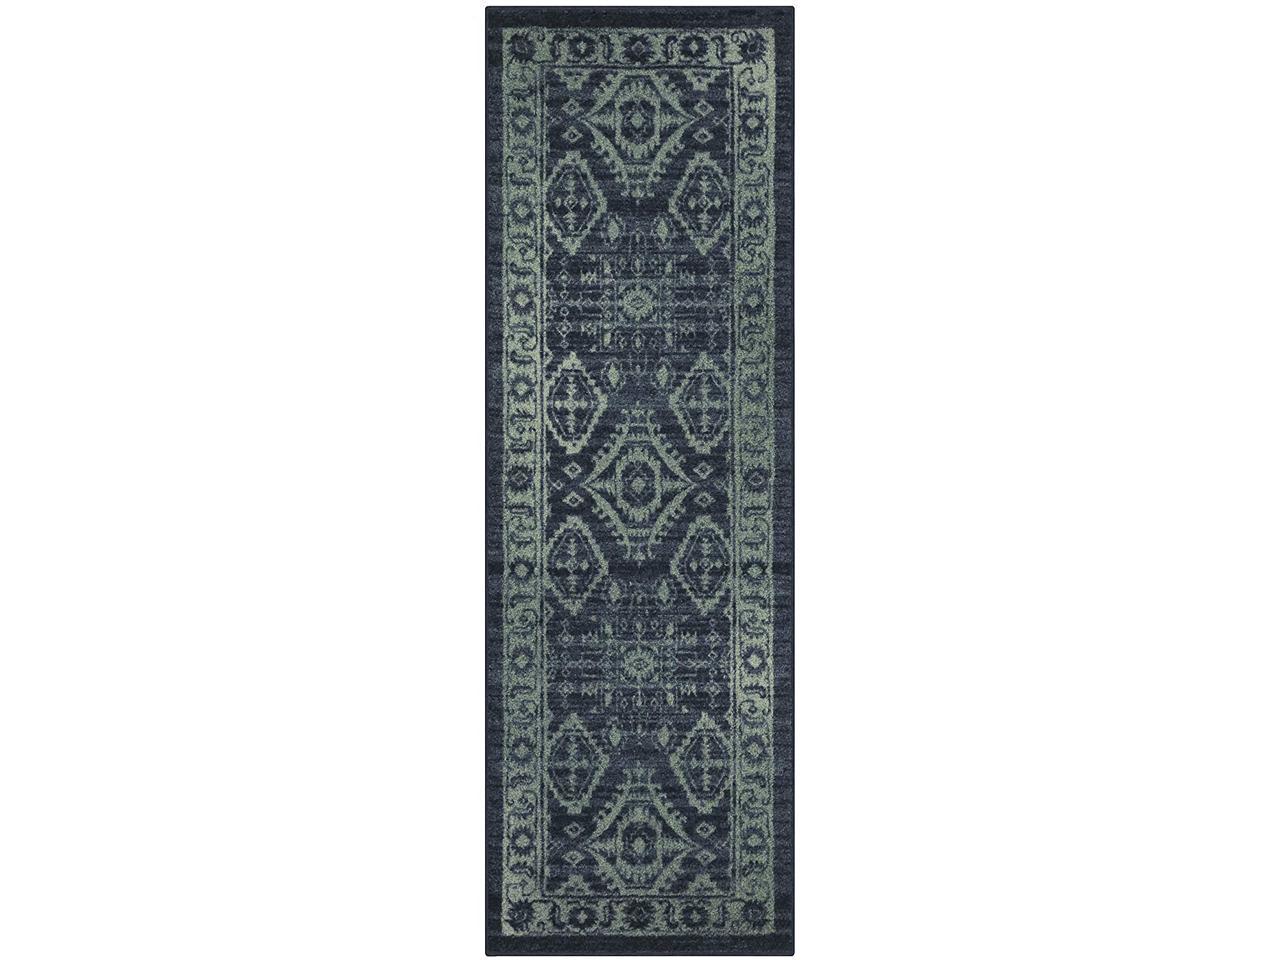 Made Details about   Maples Rugs Georgina Traditional Runner Rug Non Slip Hallway Entry Carpet 